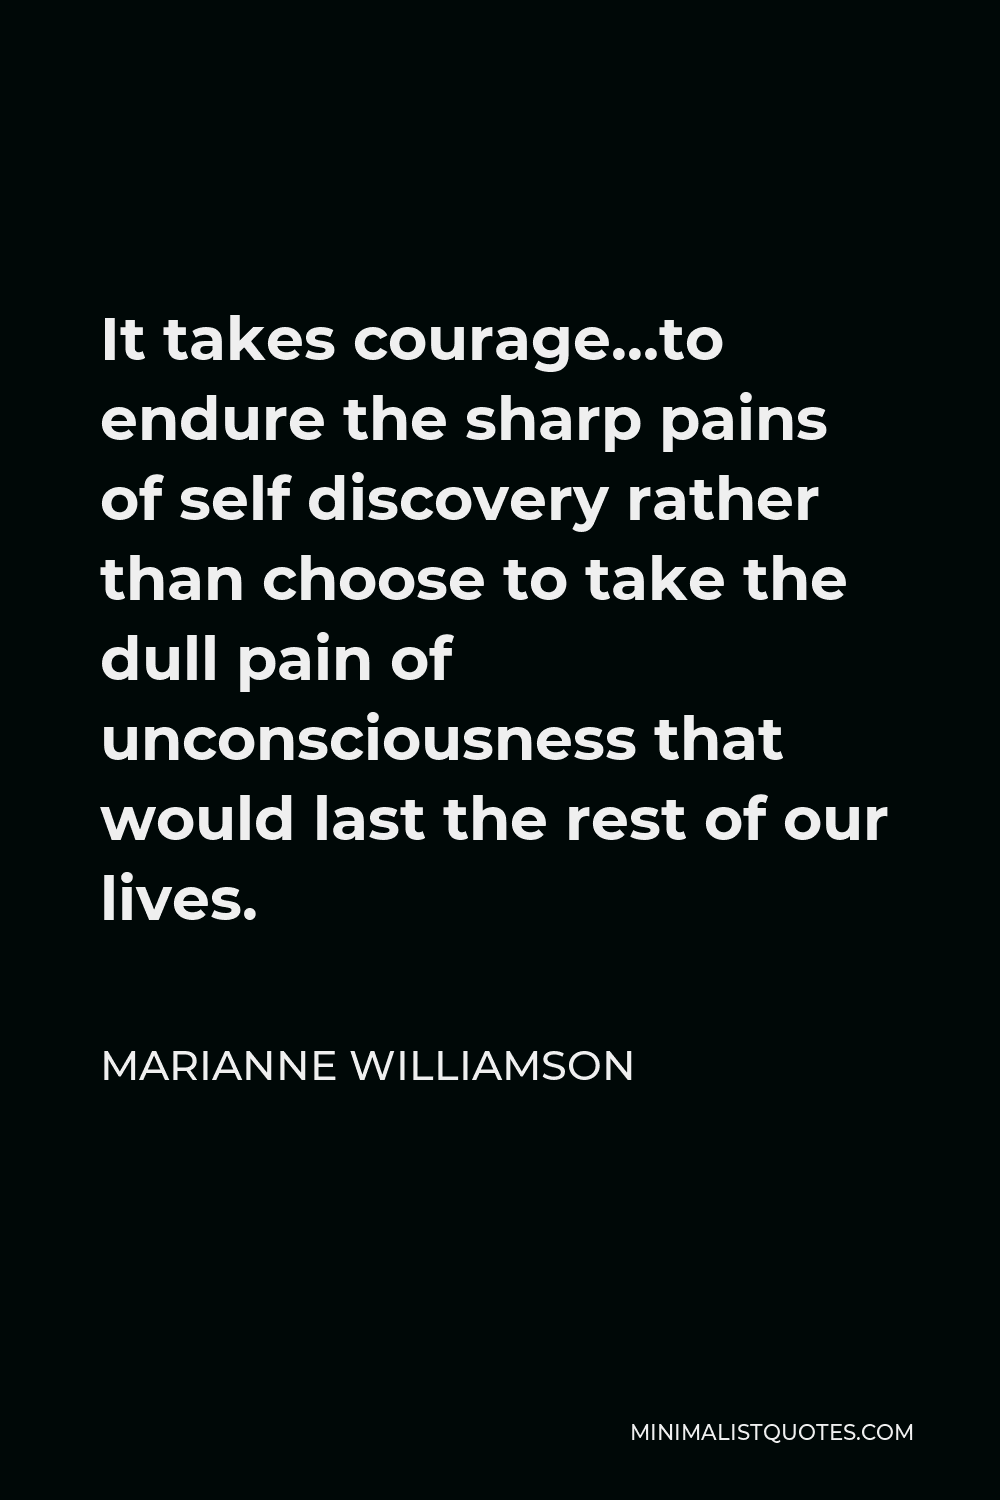 Marianne Williamson Quote - It takes courage…to endure the sharp pains of self discovery rather than choose to take the dull pain of unconsciousness that would last the rest of our lives.